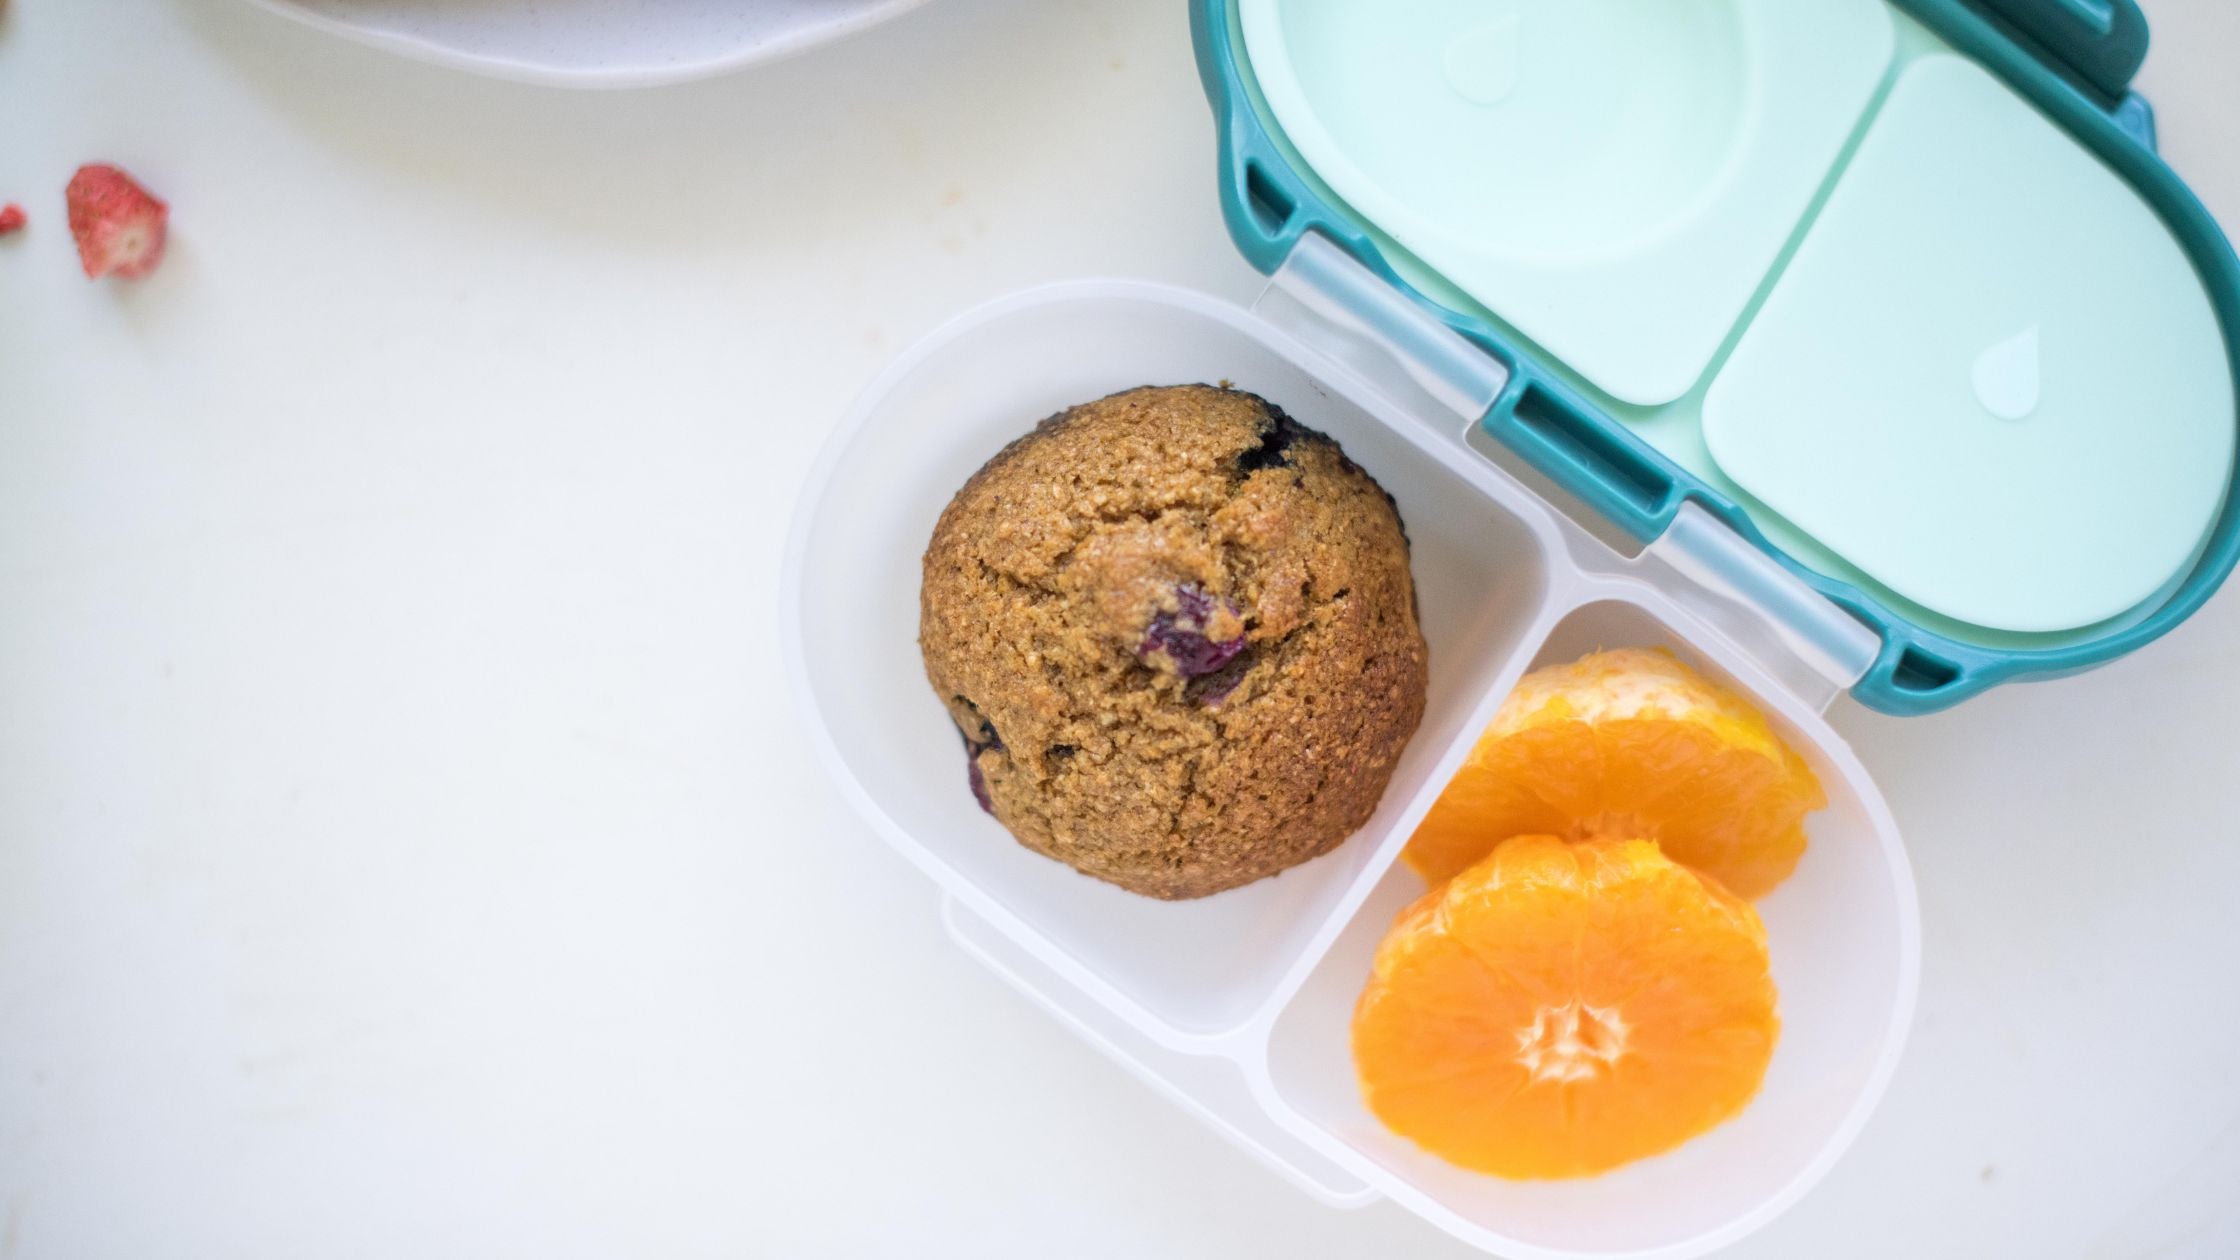 snackbox with blueberry muffin and orange